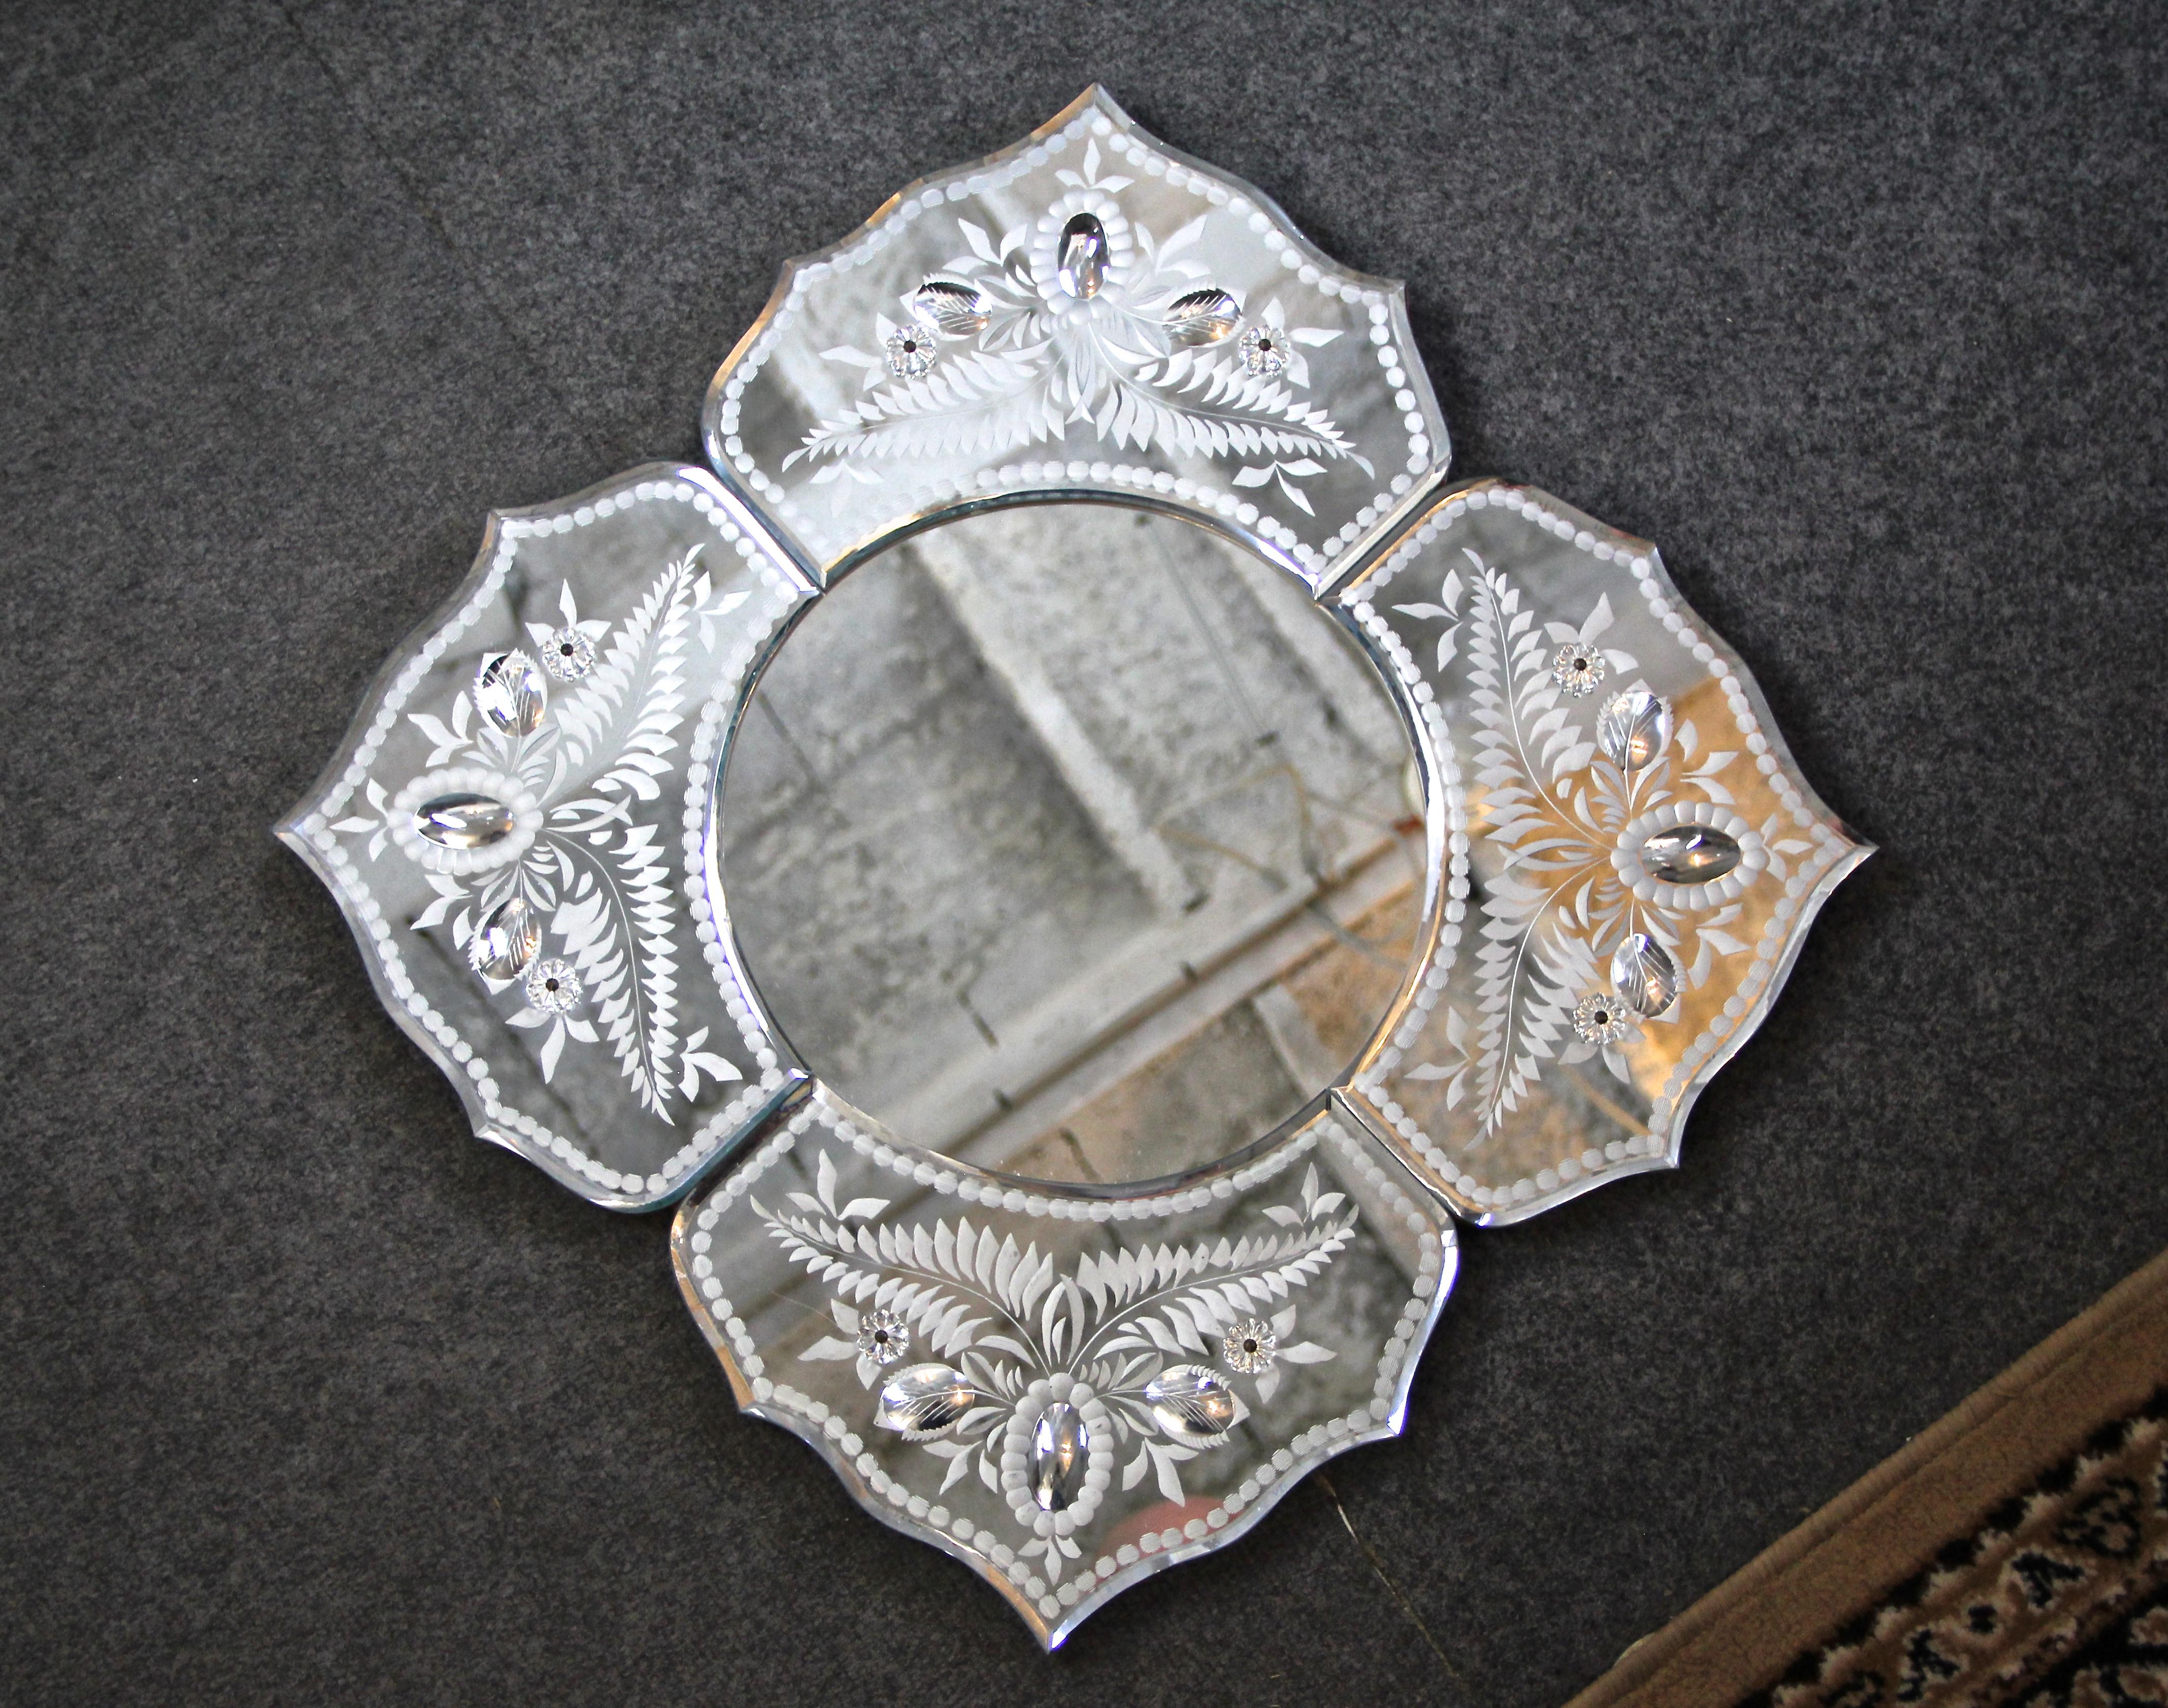 Unique Murano glass mirror from the midcentury in Italy, circa 1950-1960. The mirror´s base was made of wood and comes with a wonderful shape. A round mirror in the middle is adorned by four artfully designed and engraved Murano glass elements which